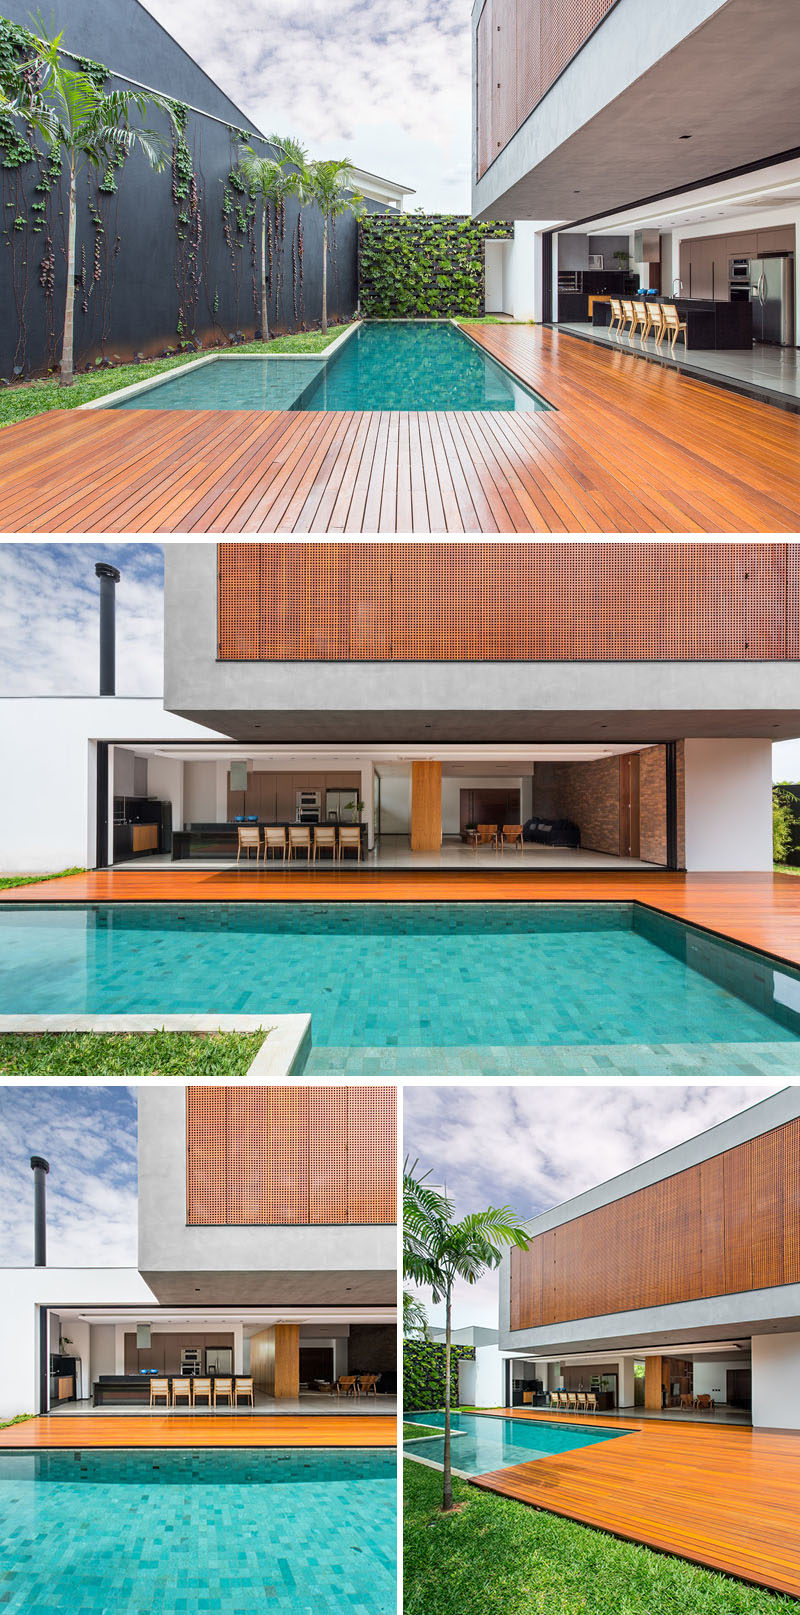 A large wooden deck wraps around this swimming pool that's located off the main living area of this Brazilian home.